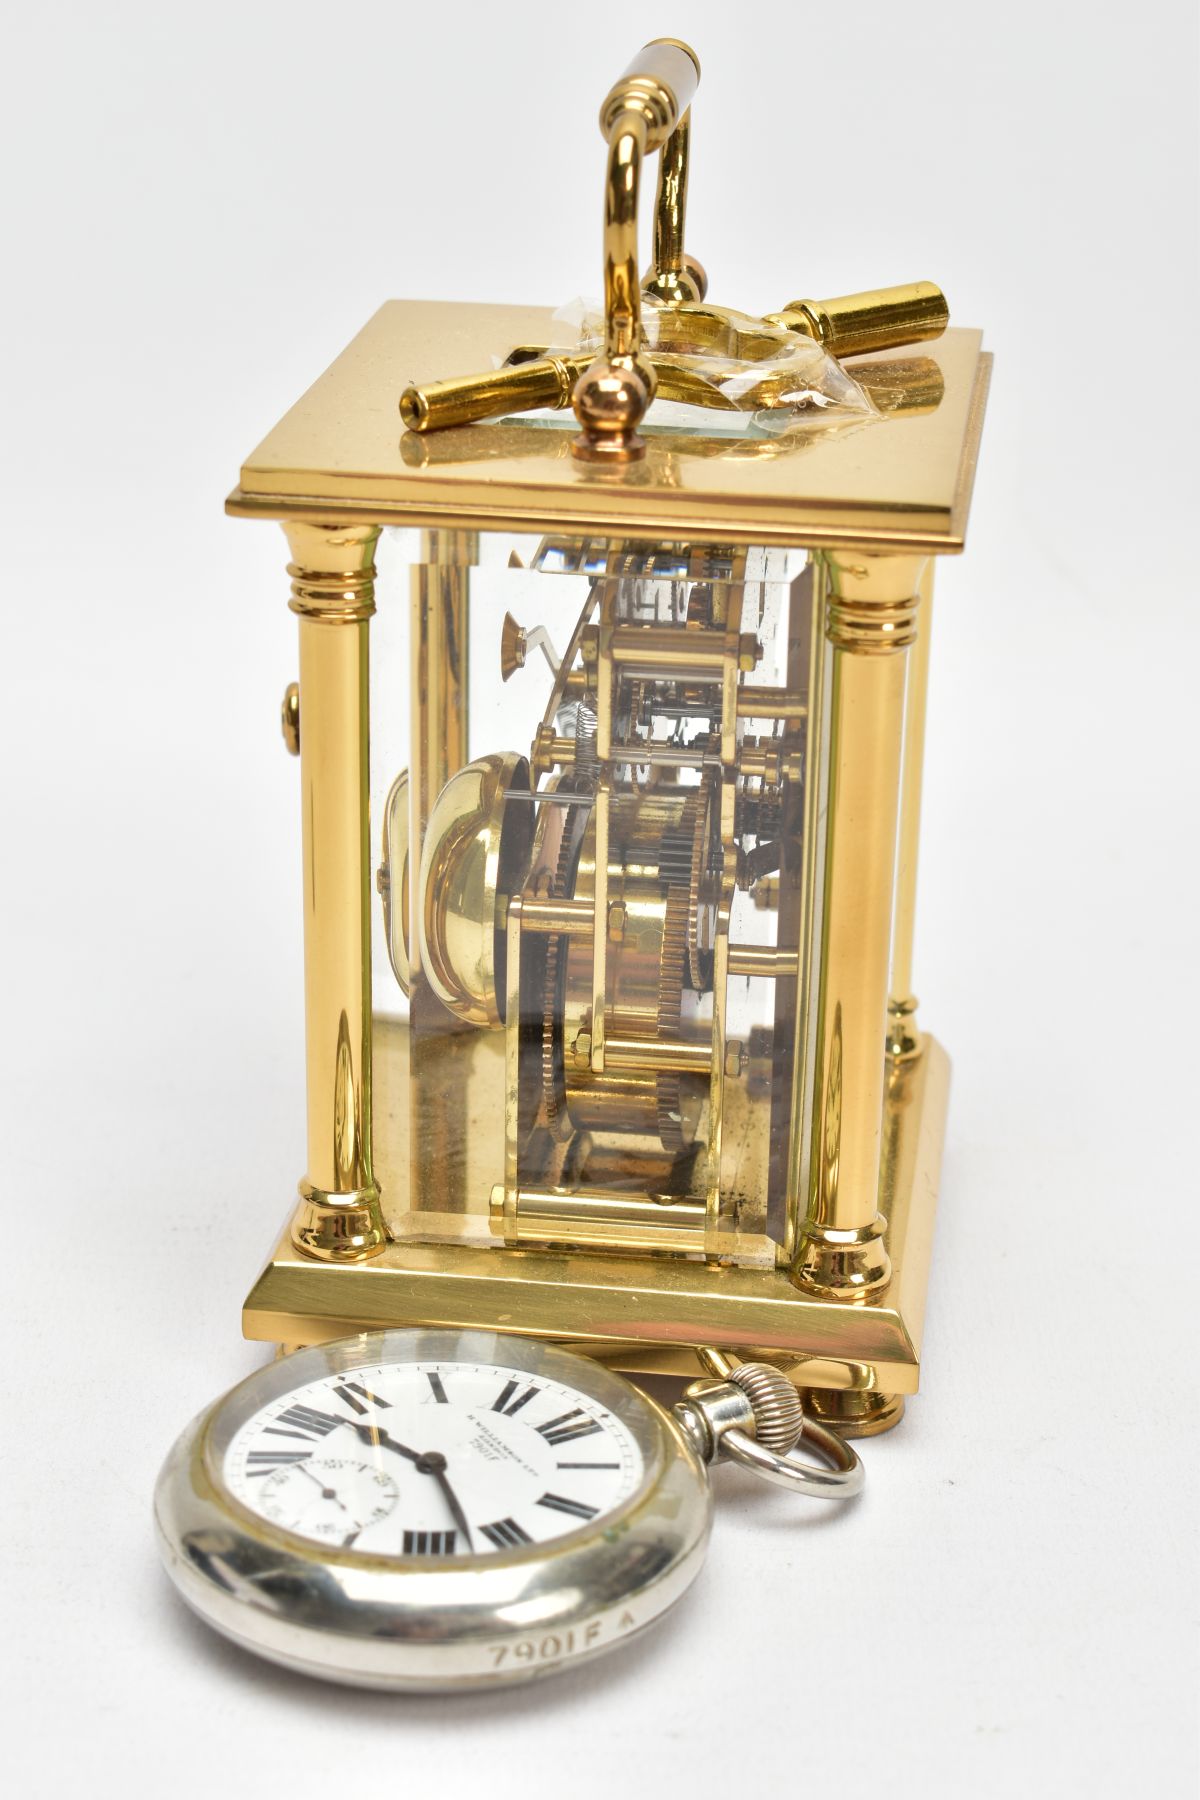 A BRASS CARRIAGE CLOCK AND A MILITARY POCKET WATCH, a white enamel face with black Roman numerals, - Image 4 of 7